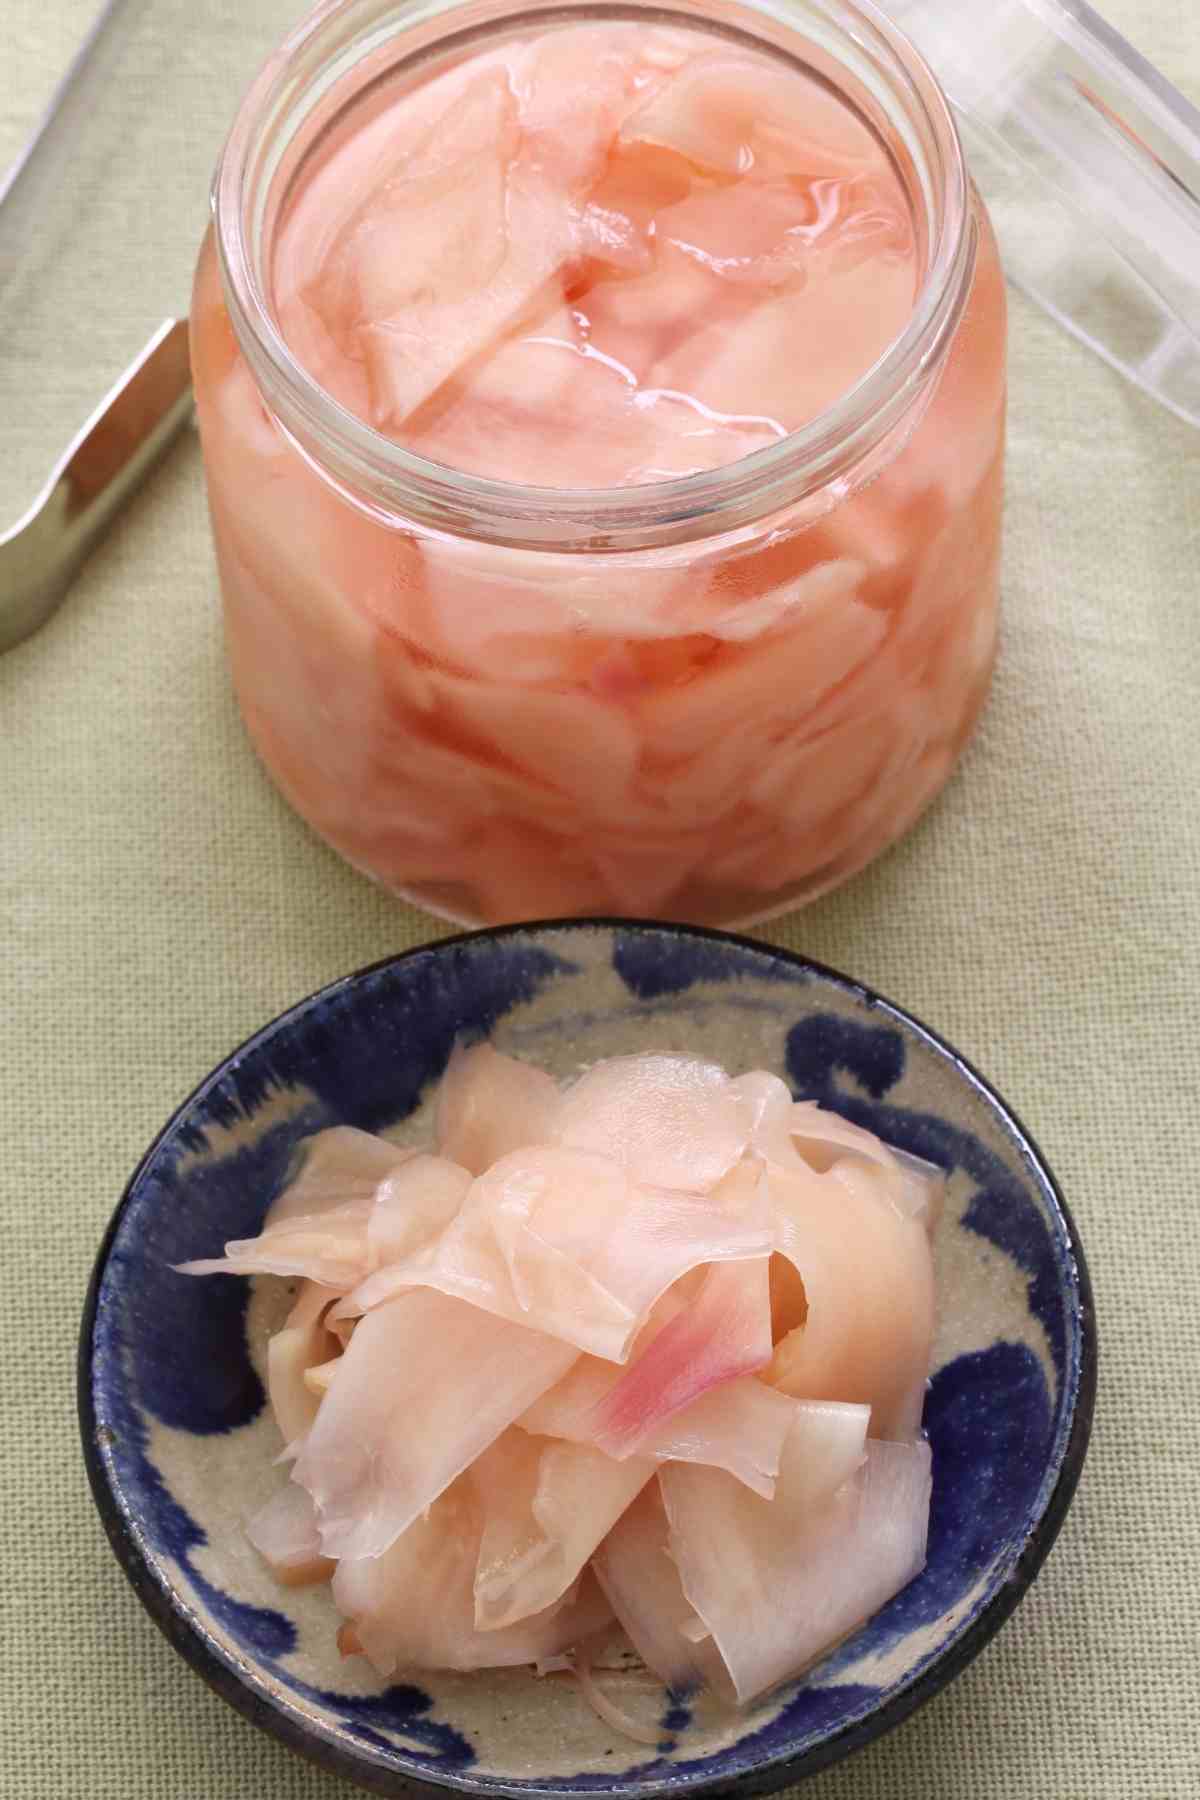 If you love sushi, you'll be familiar with the soft pink pickled ginger that accompanies your delicious platter of seafood and rice - but how is it made?